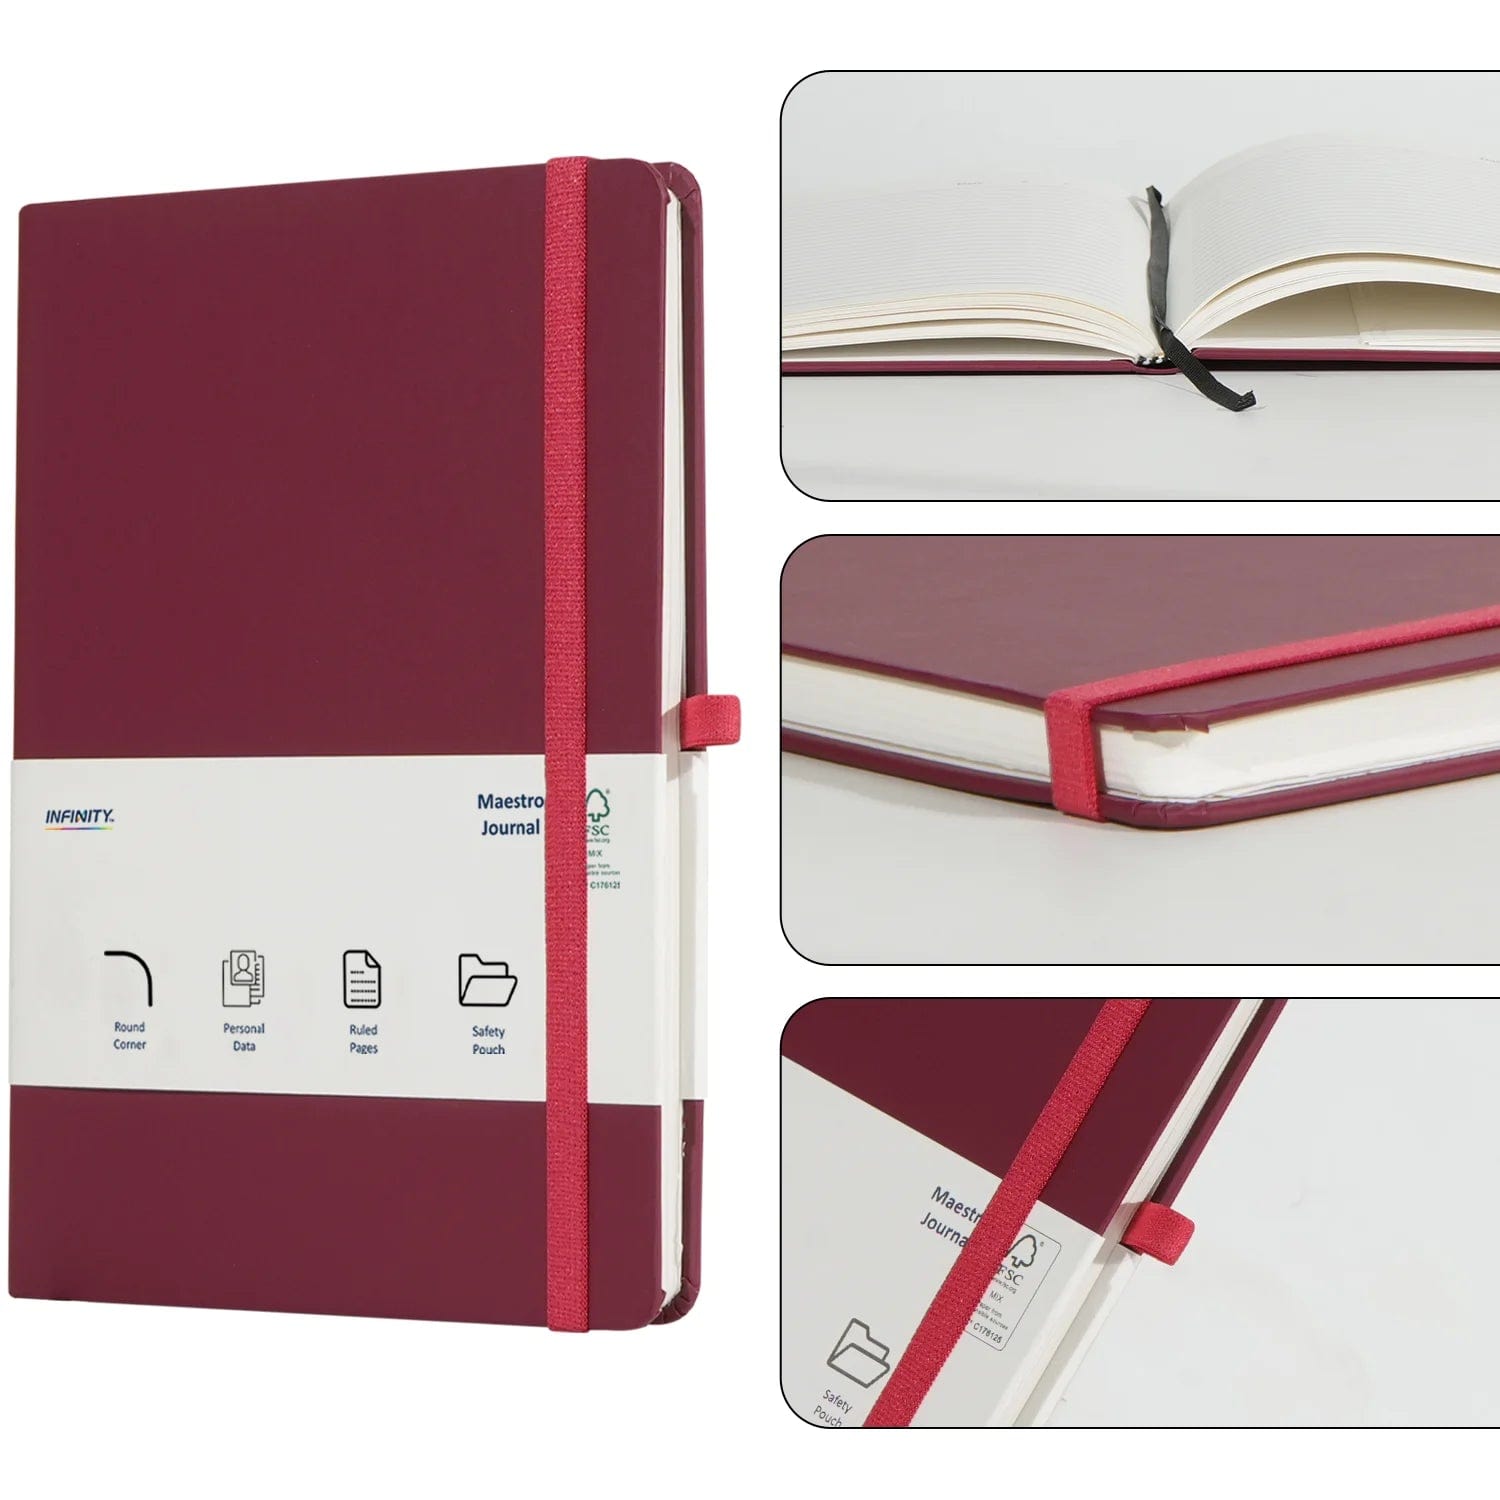 Infinity A5 Maestro Journal Notebook with Lined Pages, Pen Loop, Ribbon, Date Marks and Paper Pocket, Medium Hardback Journal, 160 Pages Note, Sustainably Sourced paper Maroon - Infinity Market